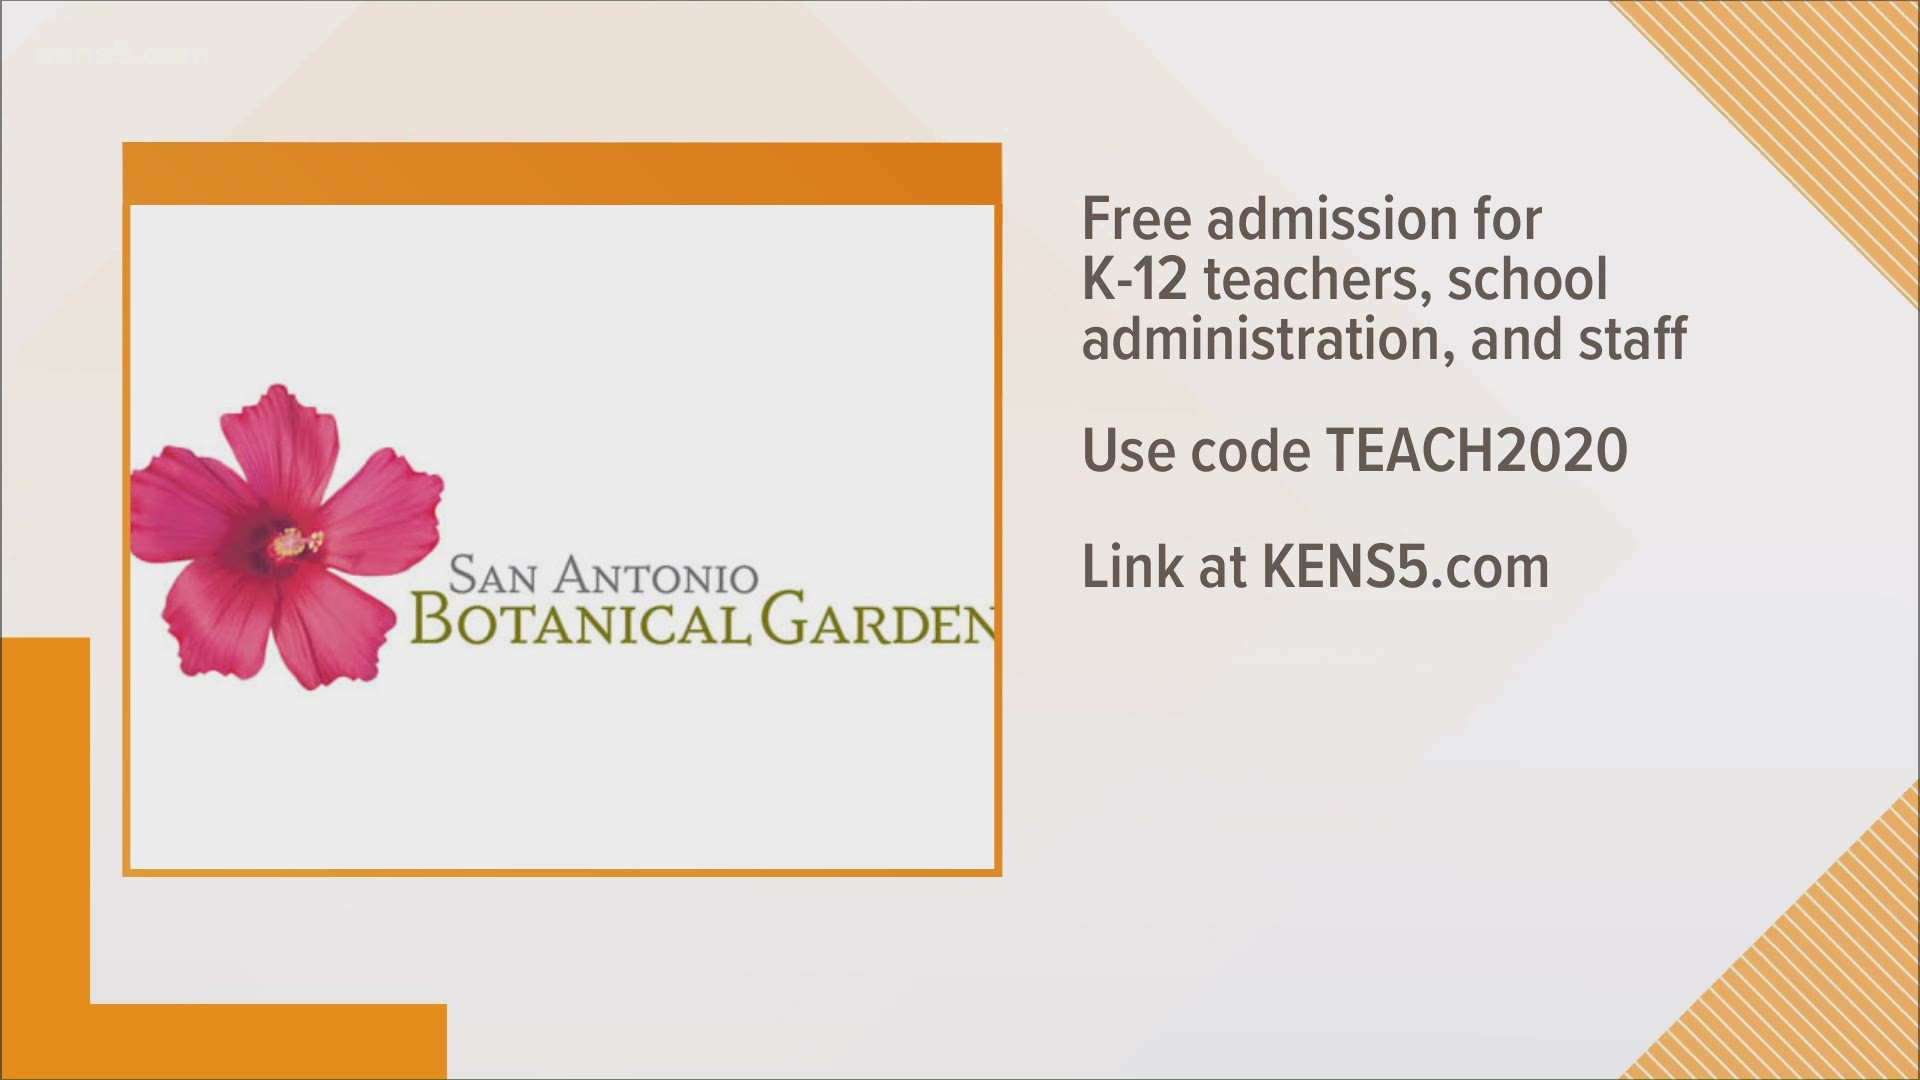 Teachers and school staff: The San Antonio Botanical Garden has an offer you don't want to miss.